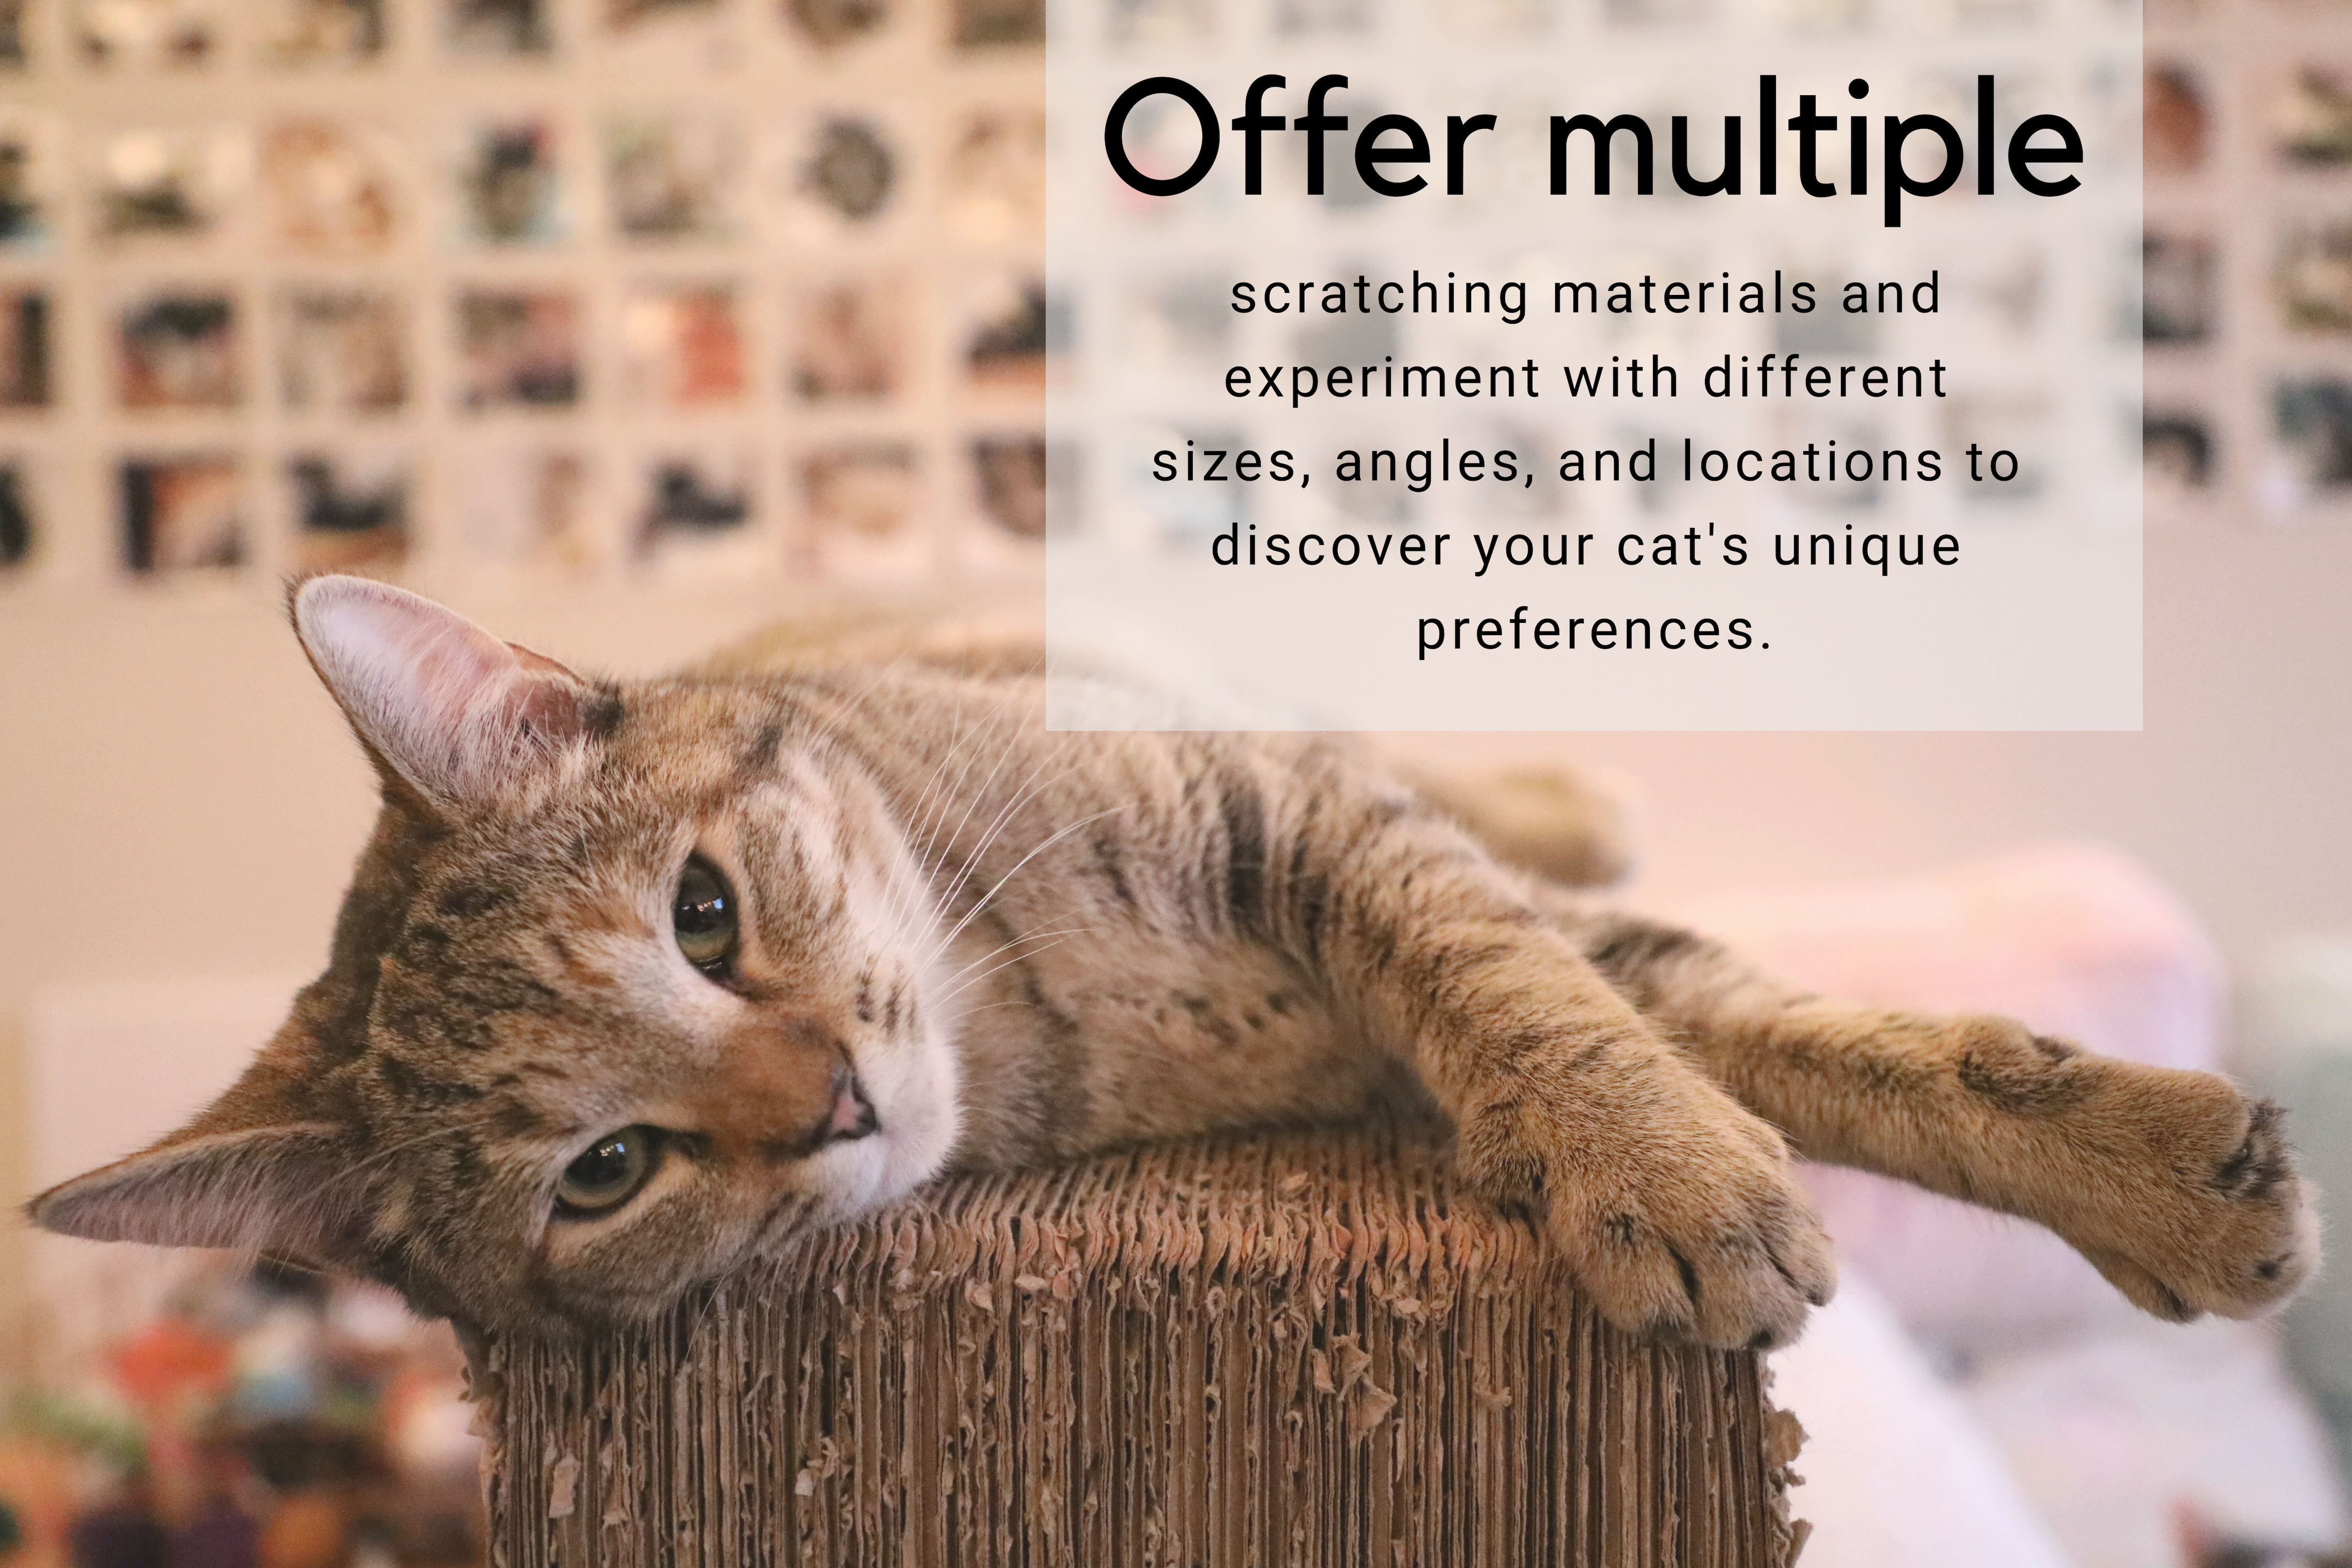 Offer multiple scratching materials and experiment with different sizes, angles, and locations to discover your cat's unique preferences.